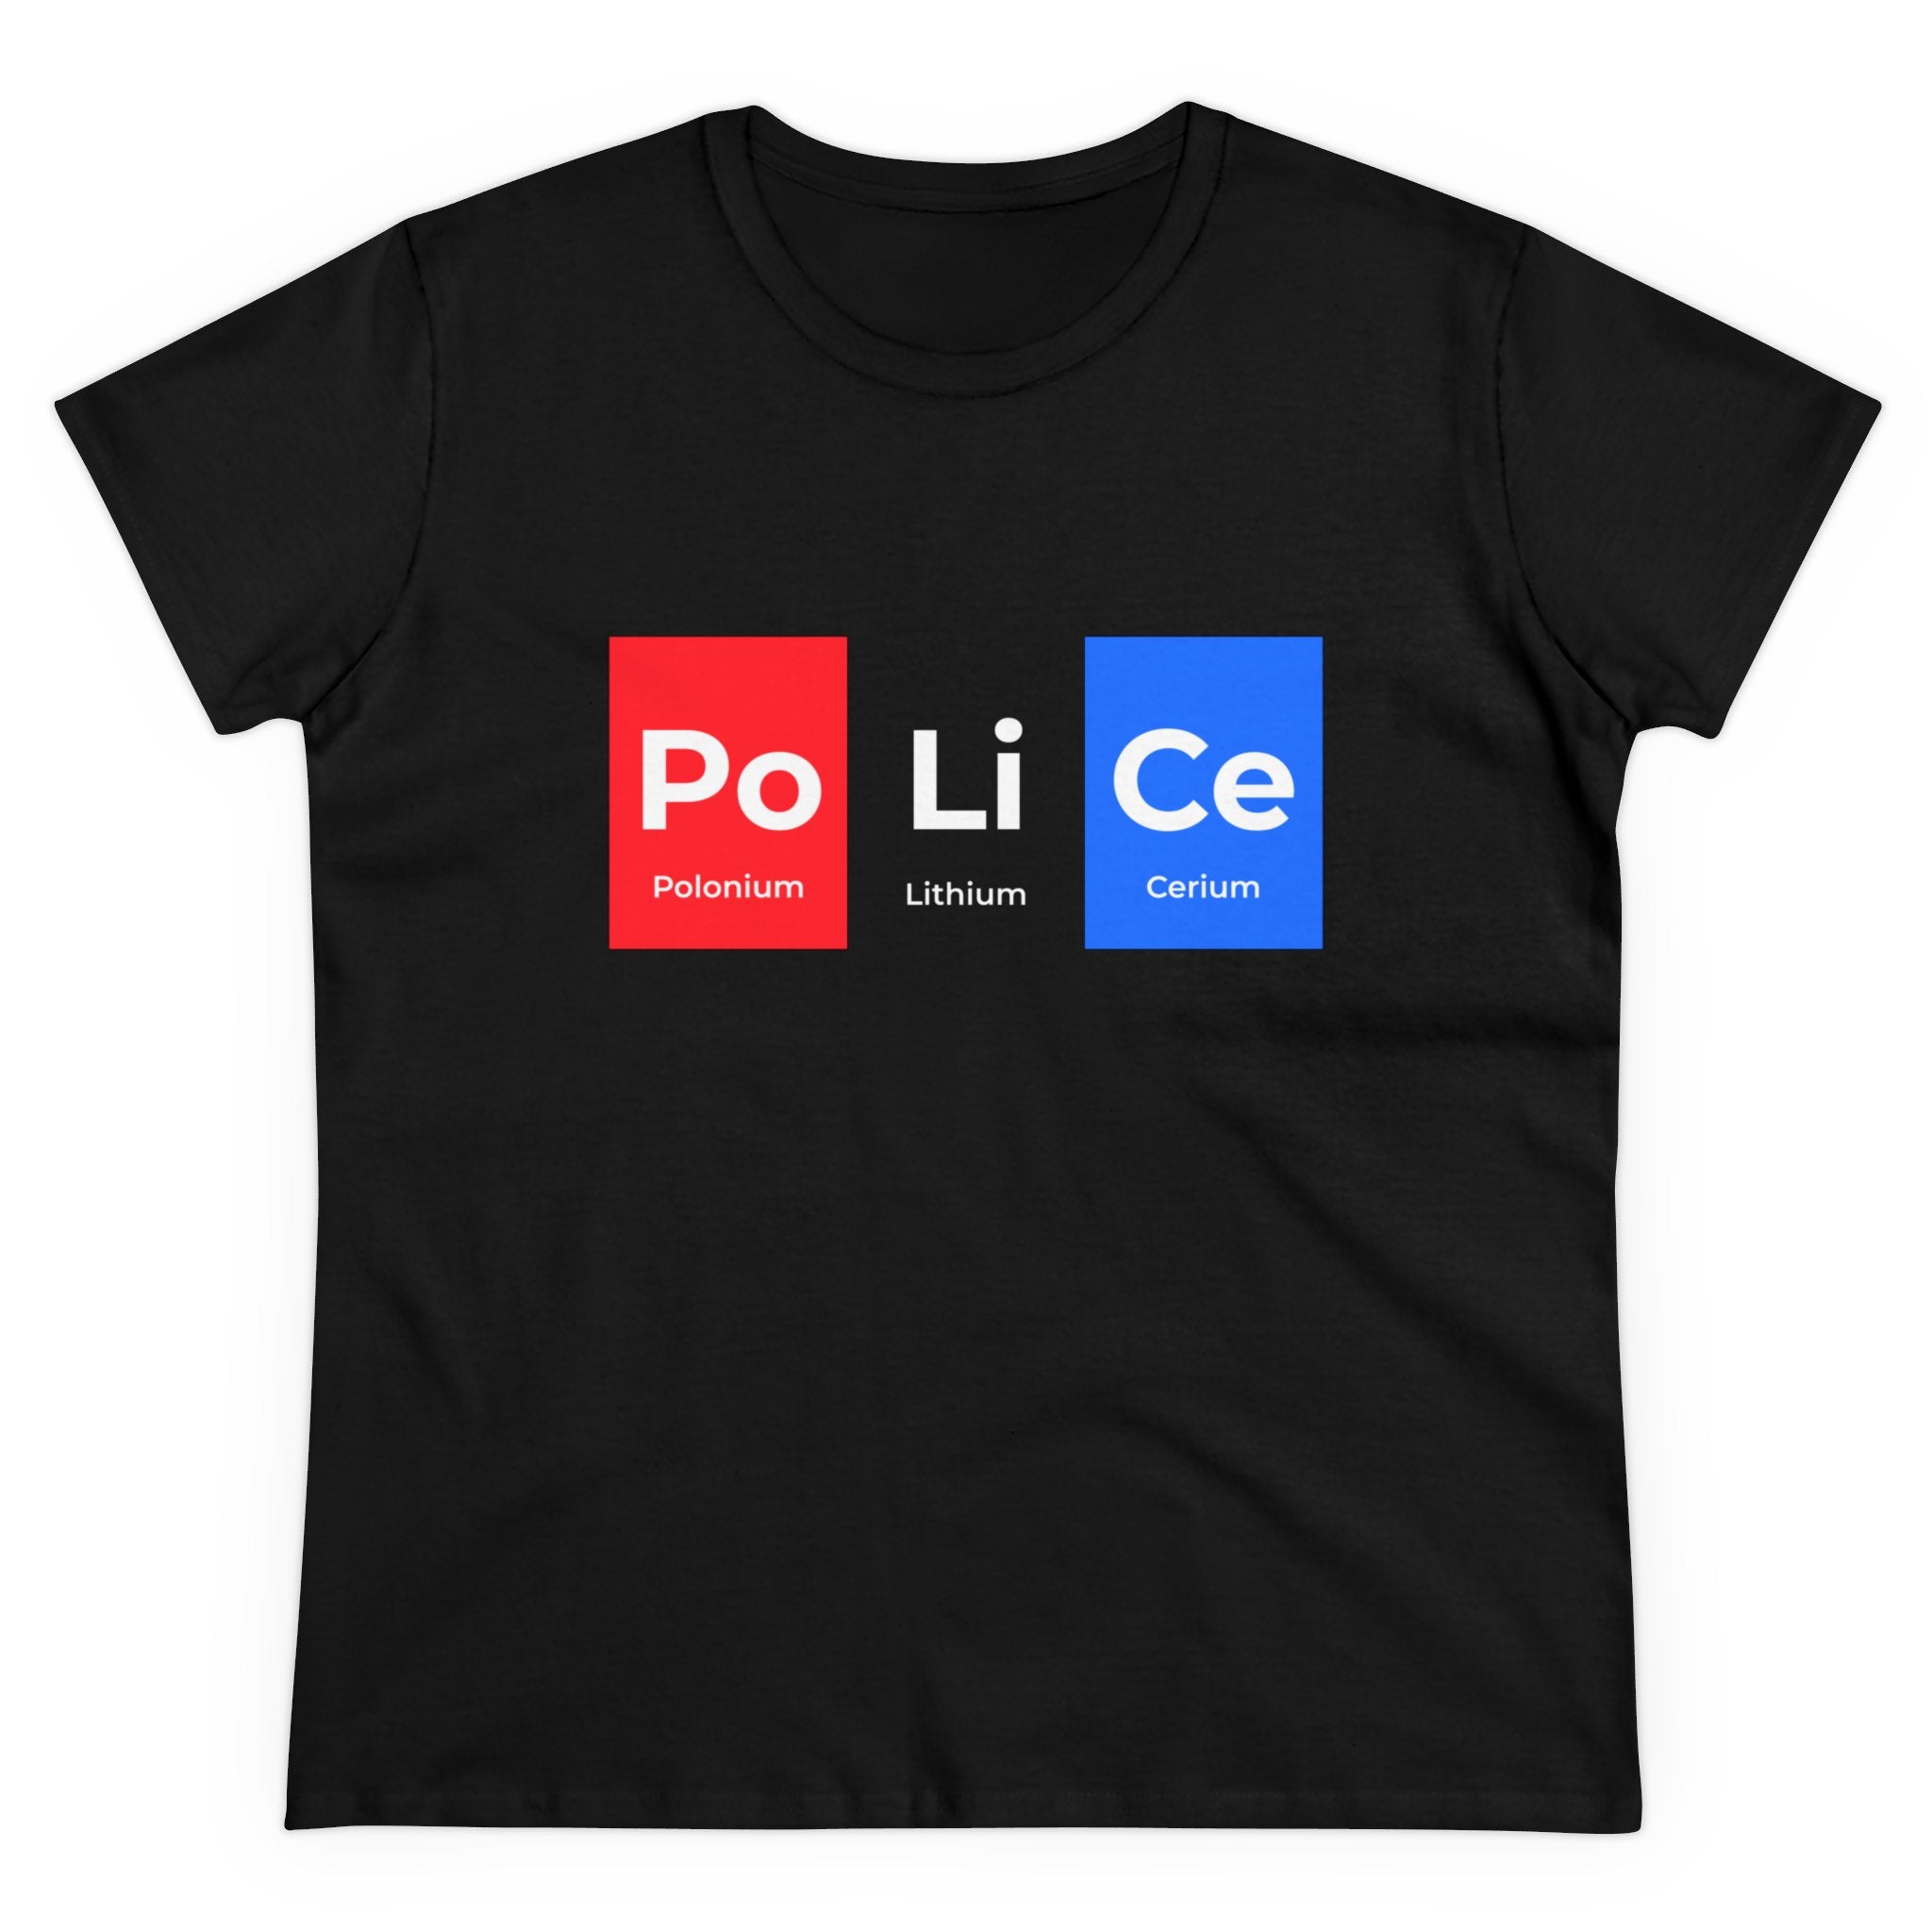 A black Po-Li-Ce - Women's Tee featuring an innovative Po-Li-Ce design, where the word "Police" is spelled using symbols from the periodic table: Polonium (Po), Lithium (Li), and Cerium (Ce). The T-shirt is also eco-friendly.
